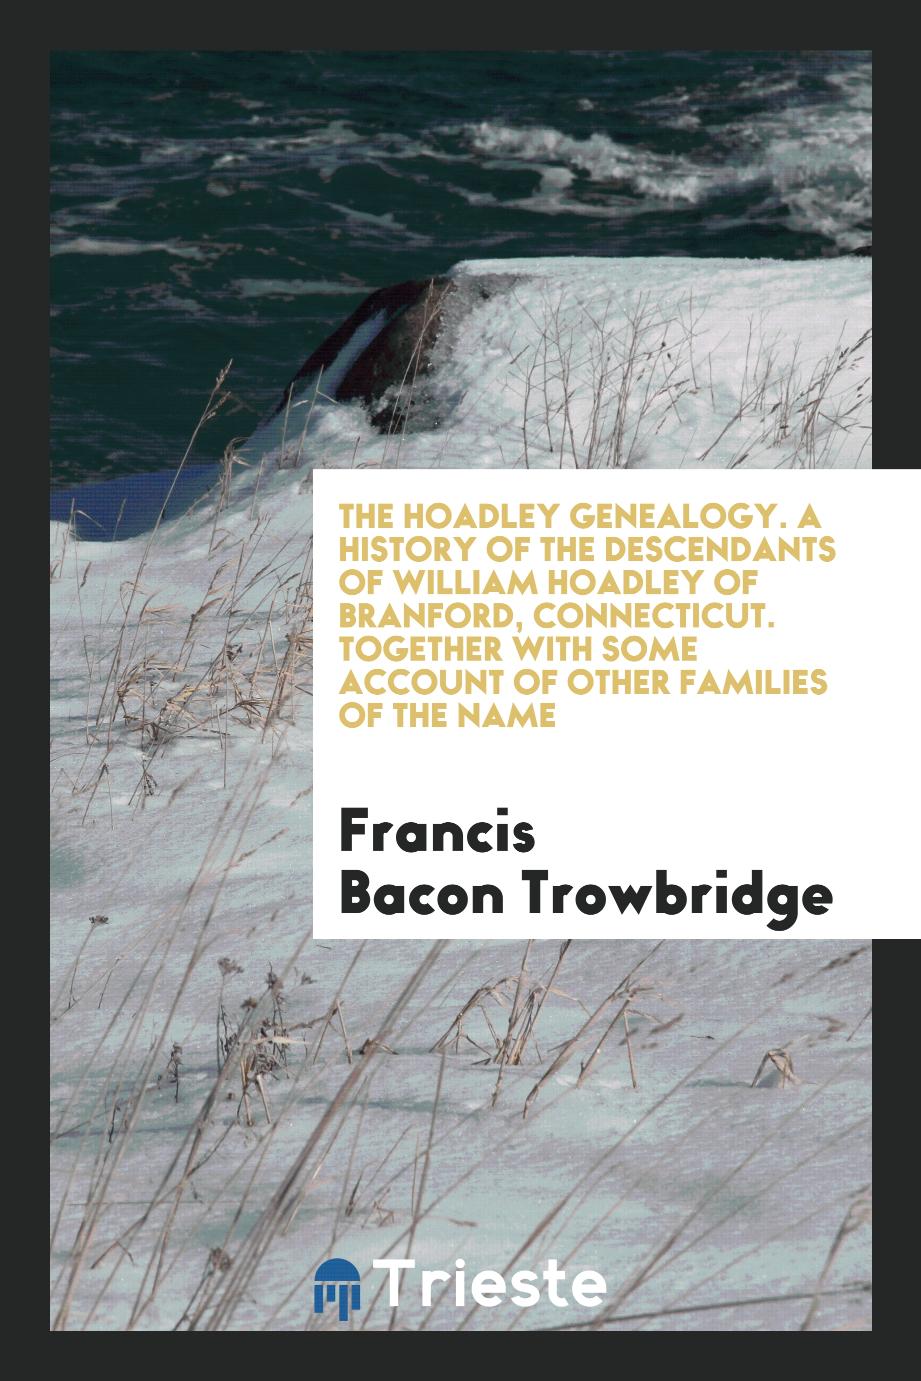 The Hoadley Genealogy. A History of the Descendants of William Hoadley of Branford, Connecticut. Together with Some Account of Other Families of the Name